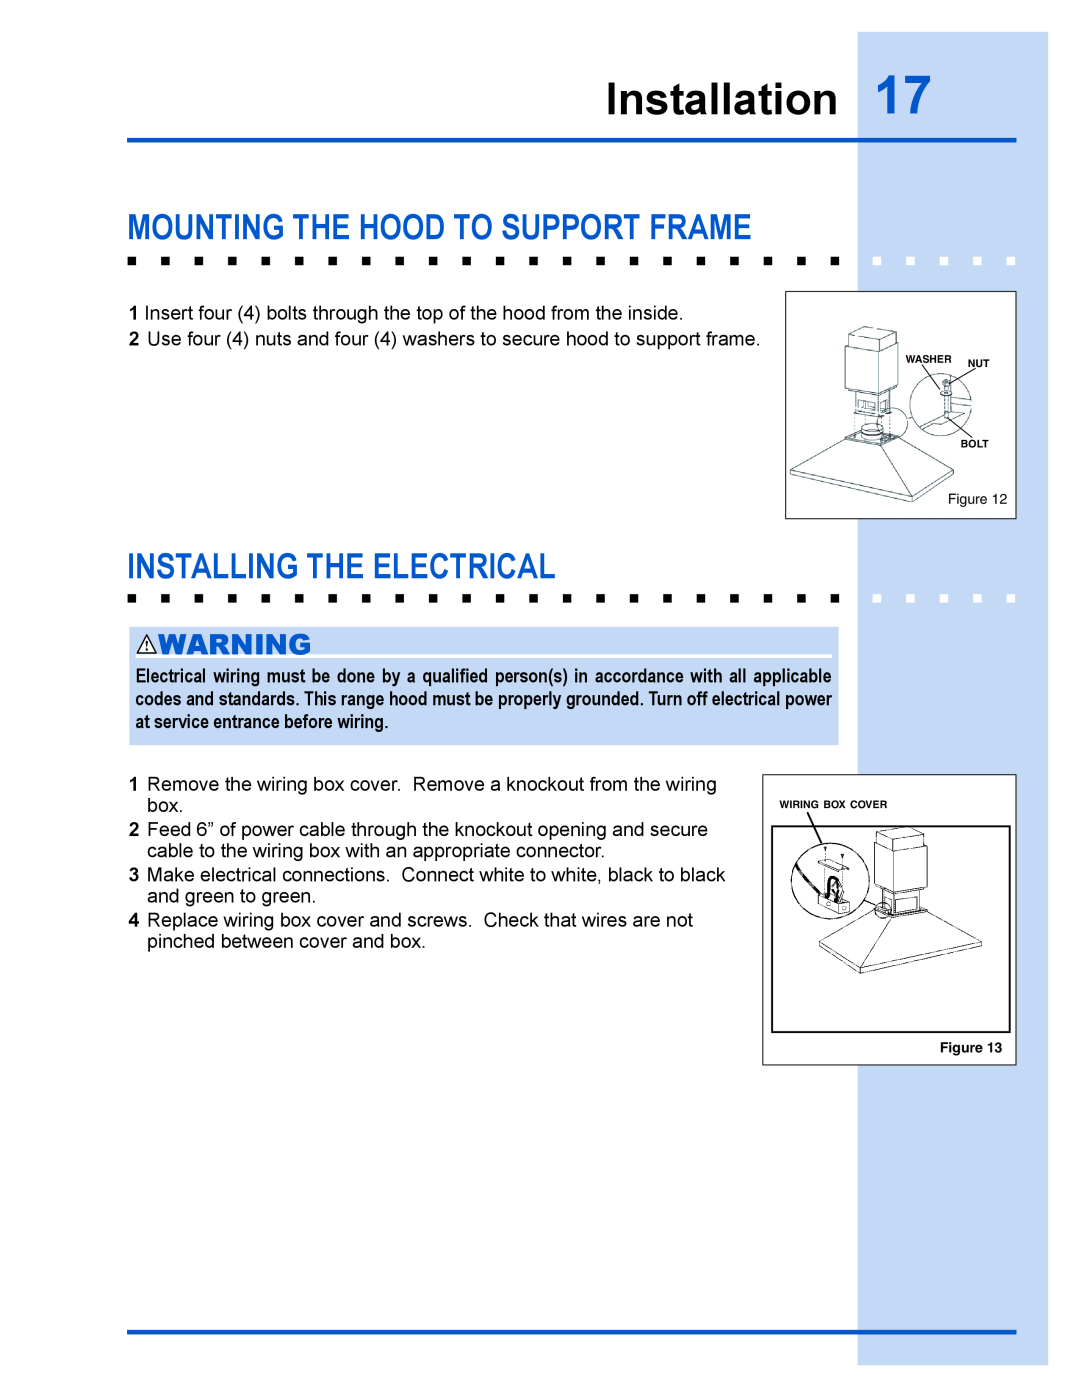 Electrolux E40PV100FS installation instructions Mounting The Hood To Support Frame, Installing The Electrical, Installation 